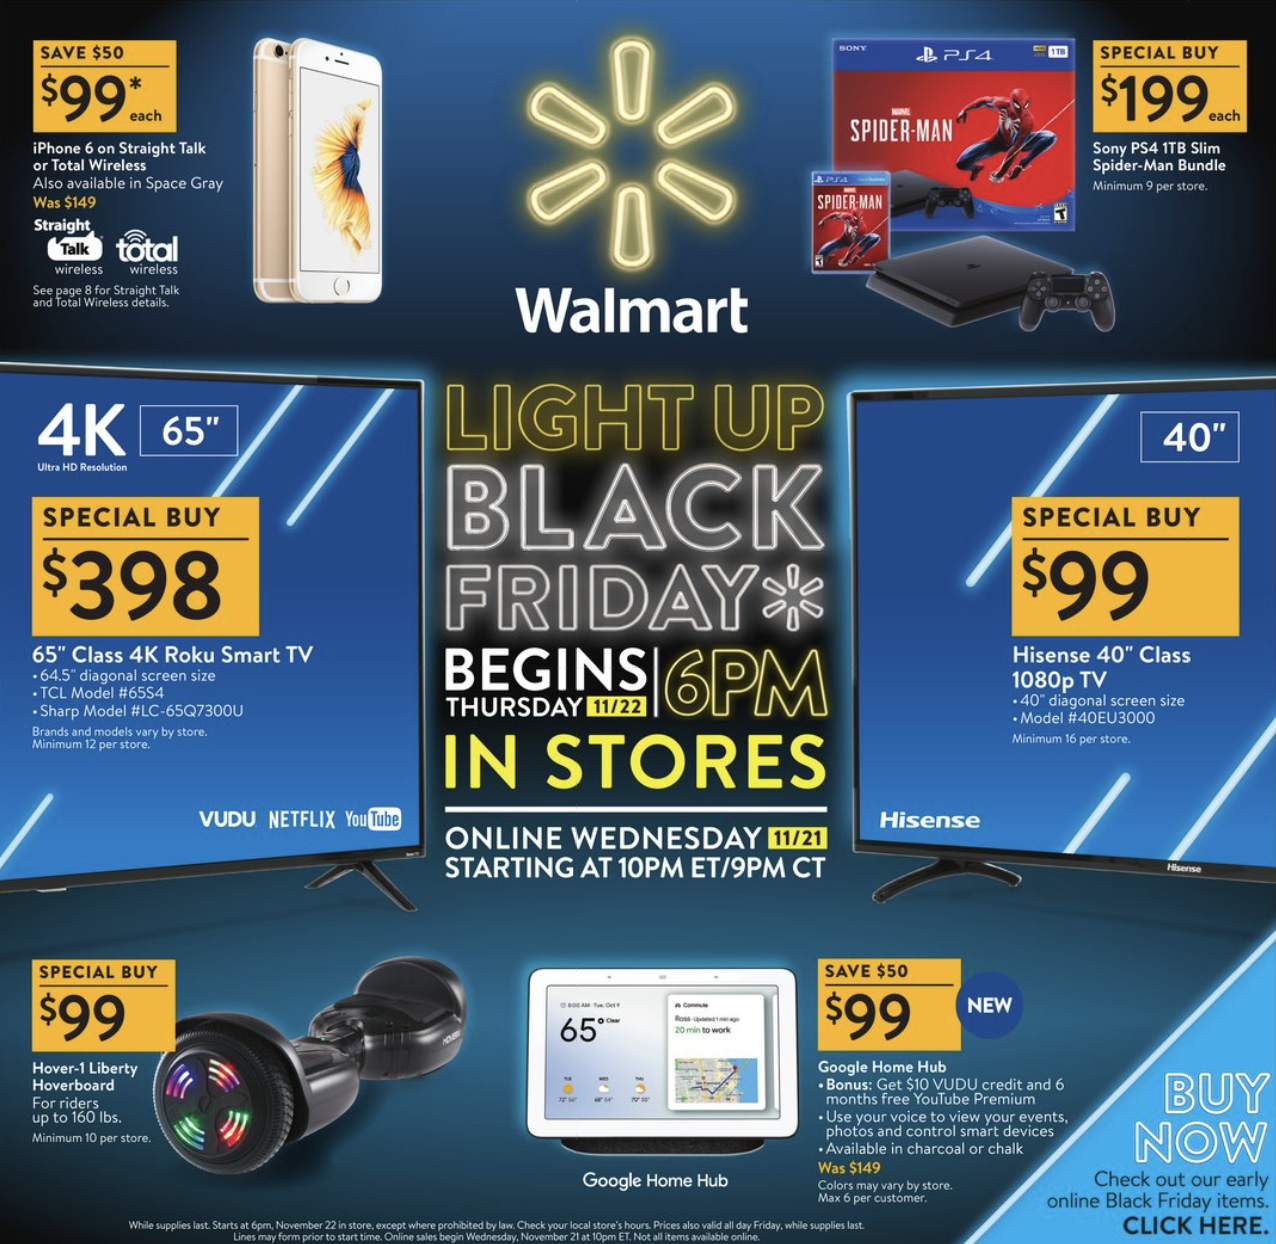 The Best Deals From the 2018 Walmart Black Friday Ad - What Are The Black Friday Deals Today